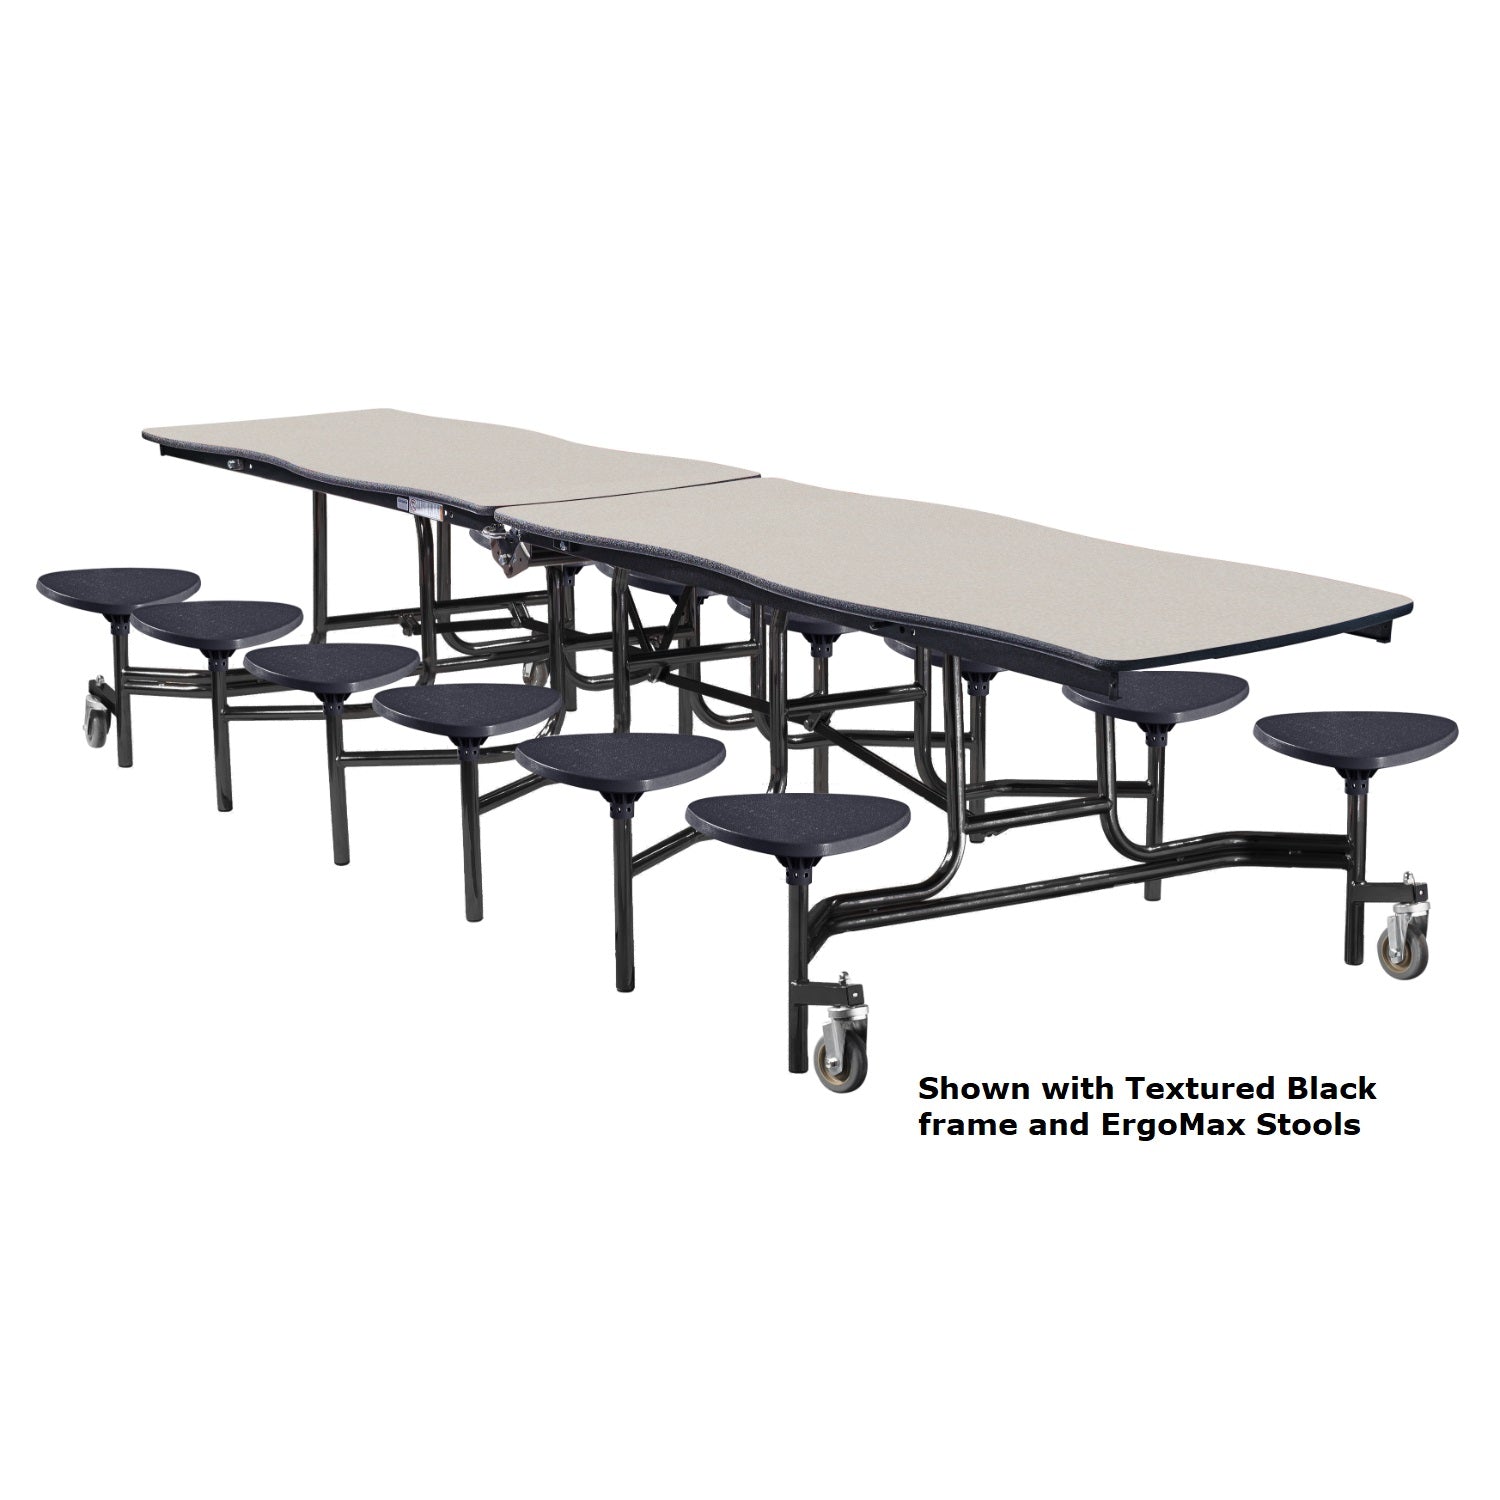 Mobile Cafeteria Table with 12 Stools, 10' Swerve, Plywood Core, Vinyl T-Mold Edge, Textured Black Frame